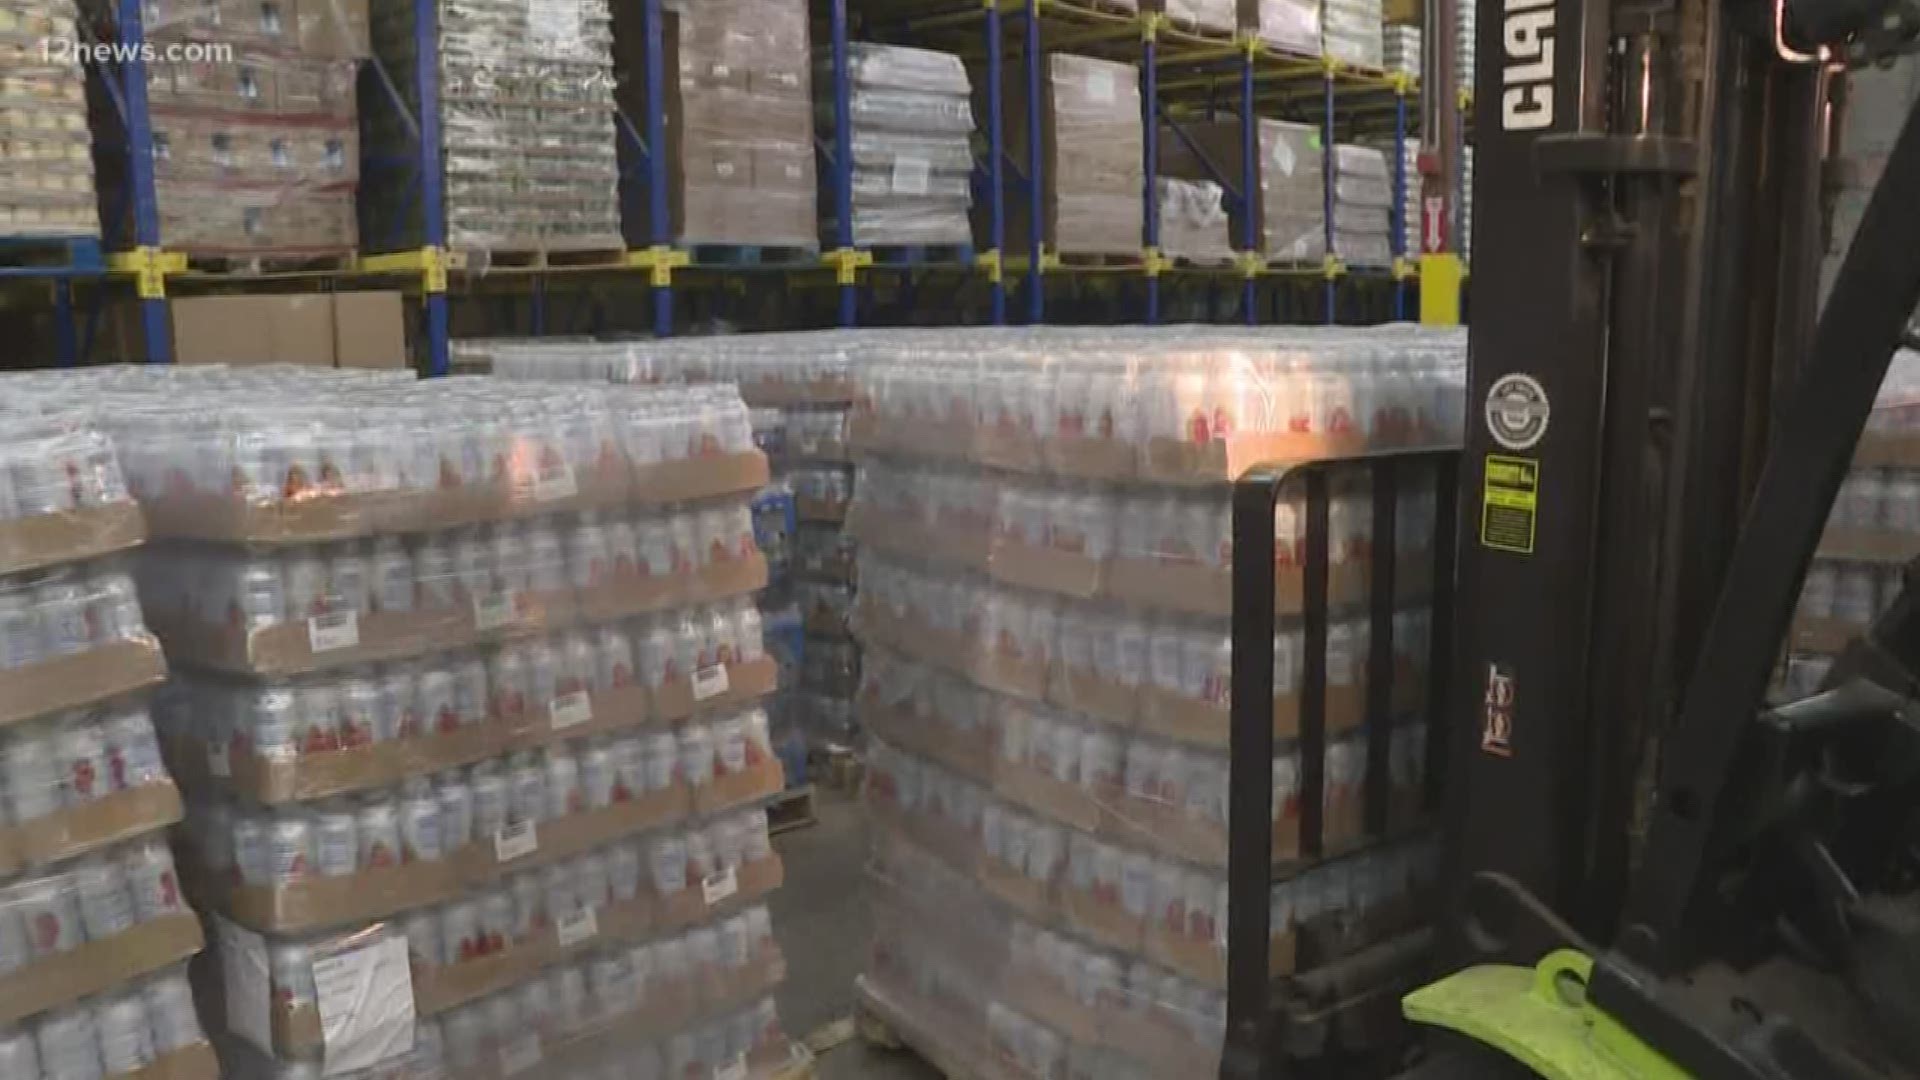 Local water company, White Water, donated thousands of bottles of water to St. Vincent De Paul on Friday. Water is an often overlooked donation but is needed.